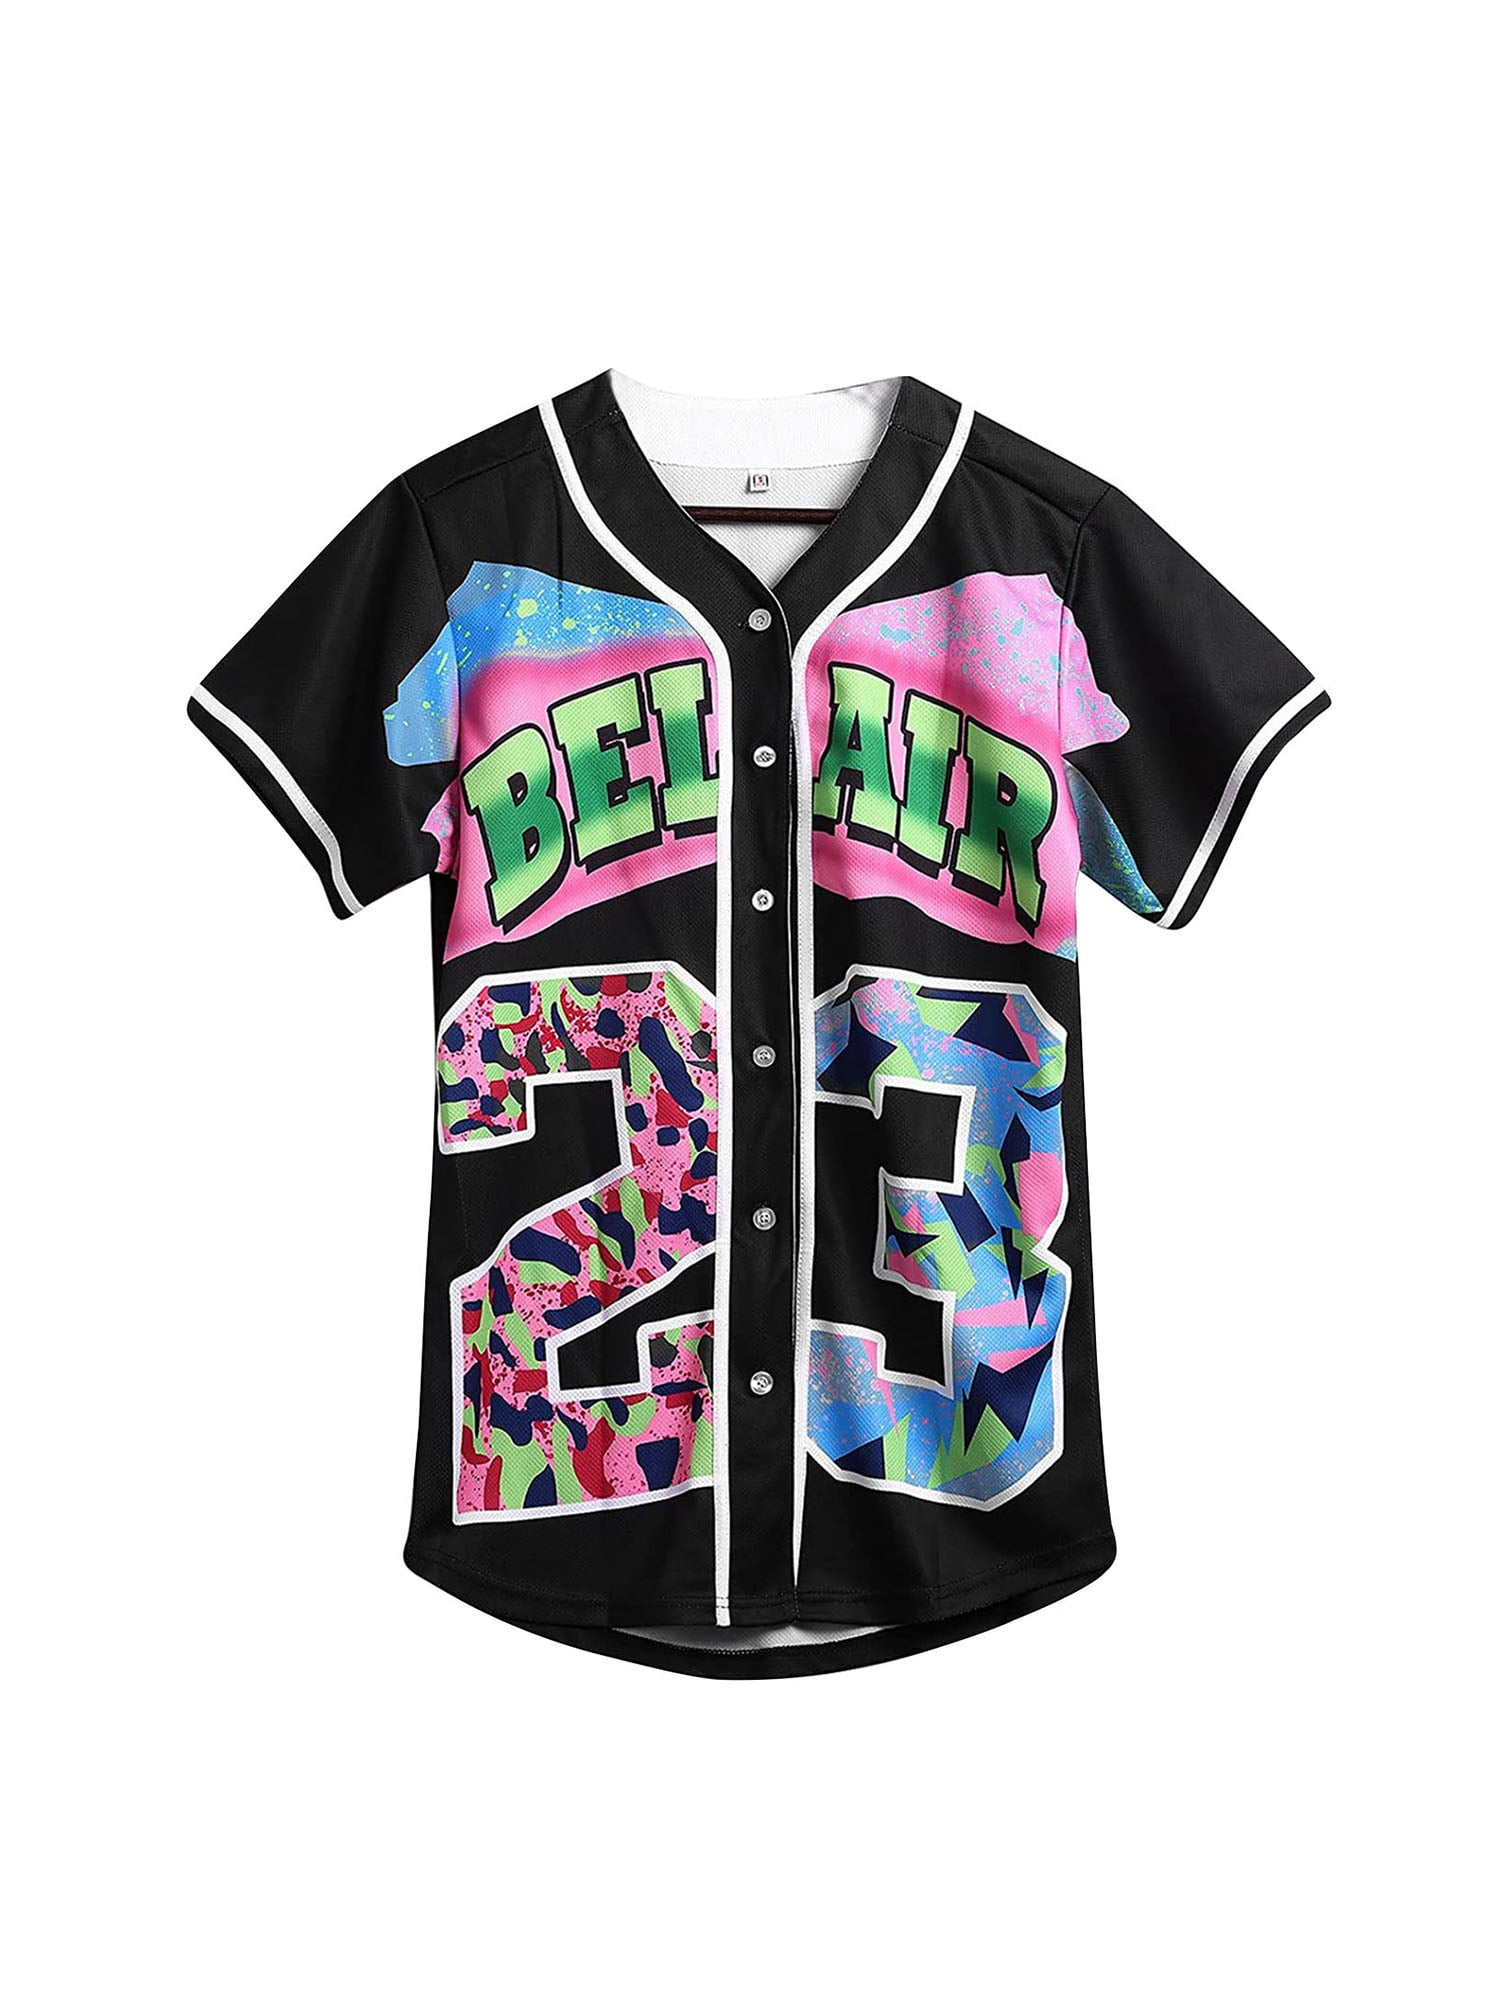 MolpeBel Air Baseball Jersey 90s Clothing for Women, Unisex Hip Hop Outfit  XL